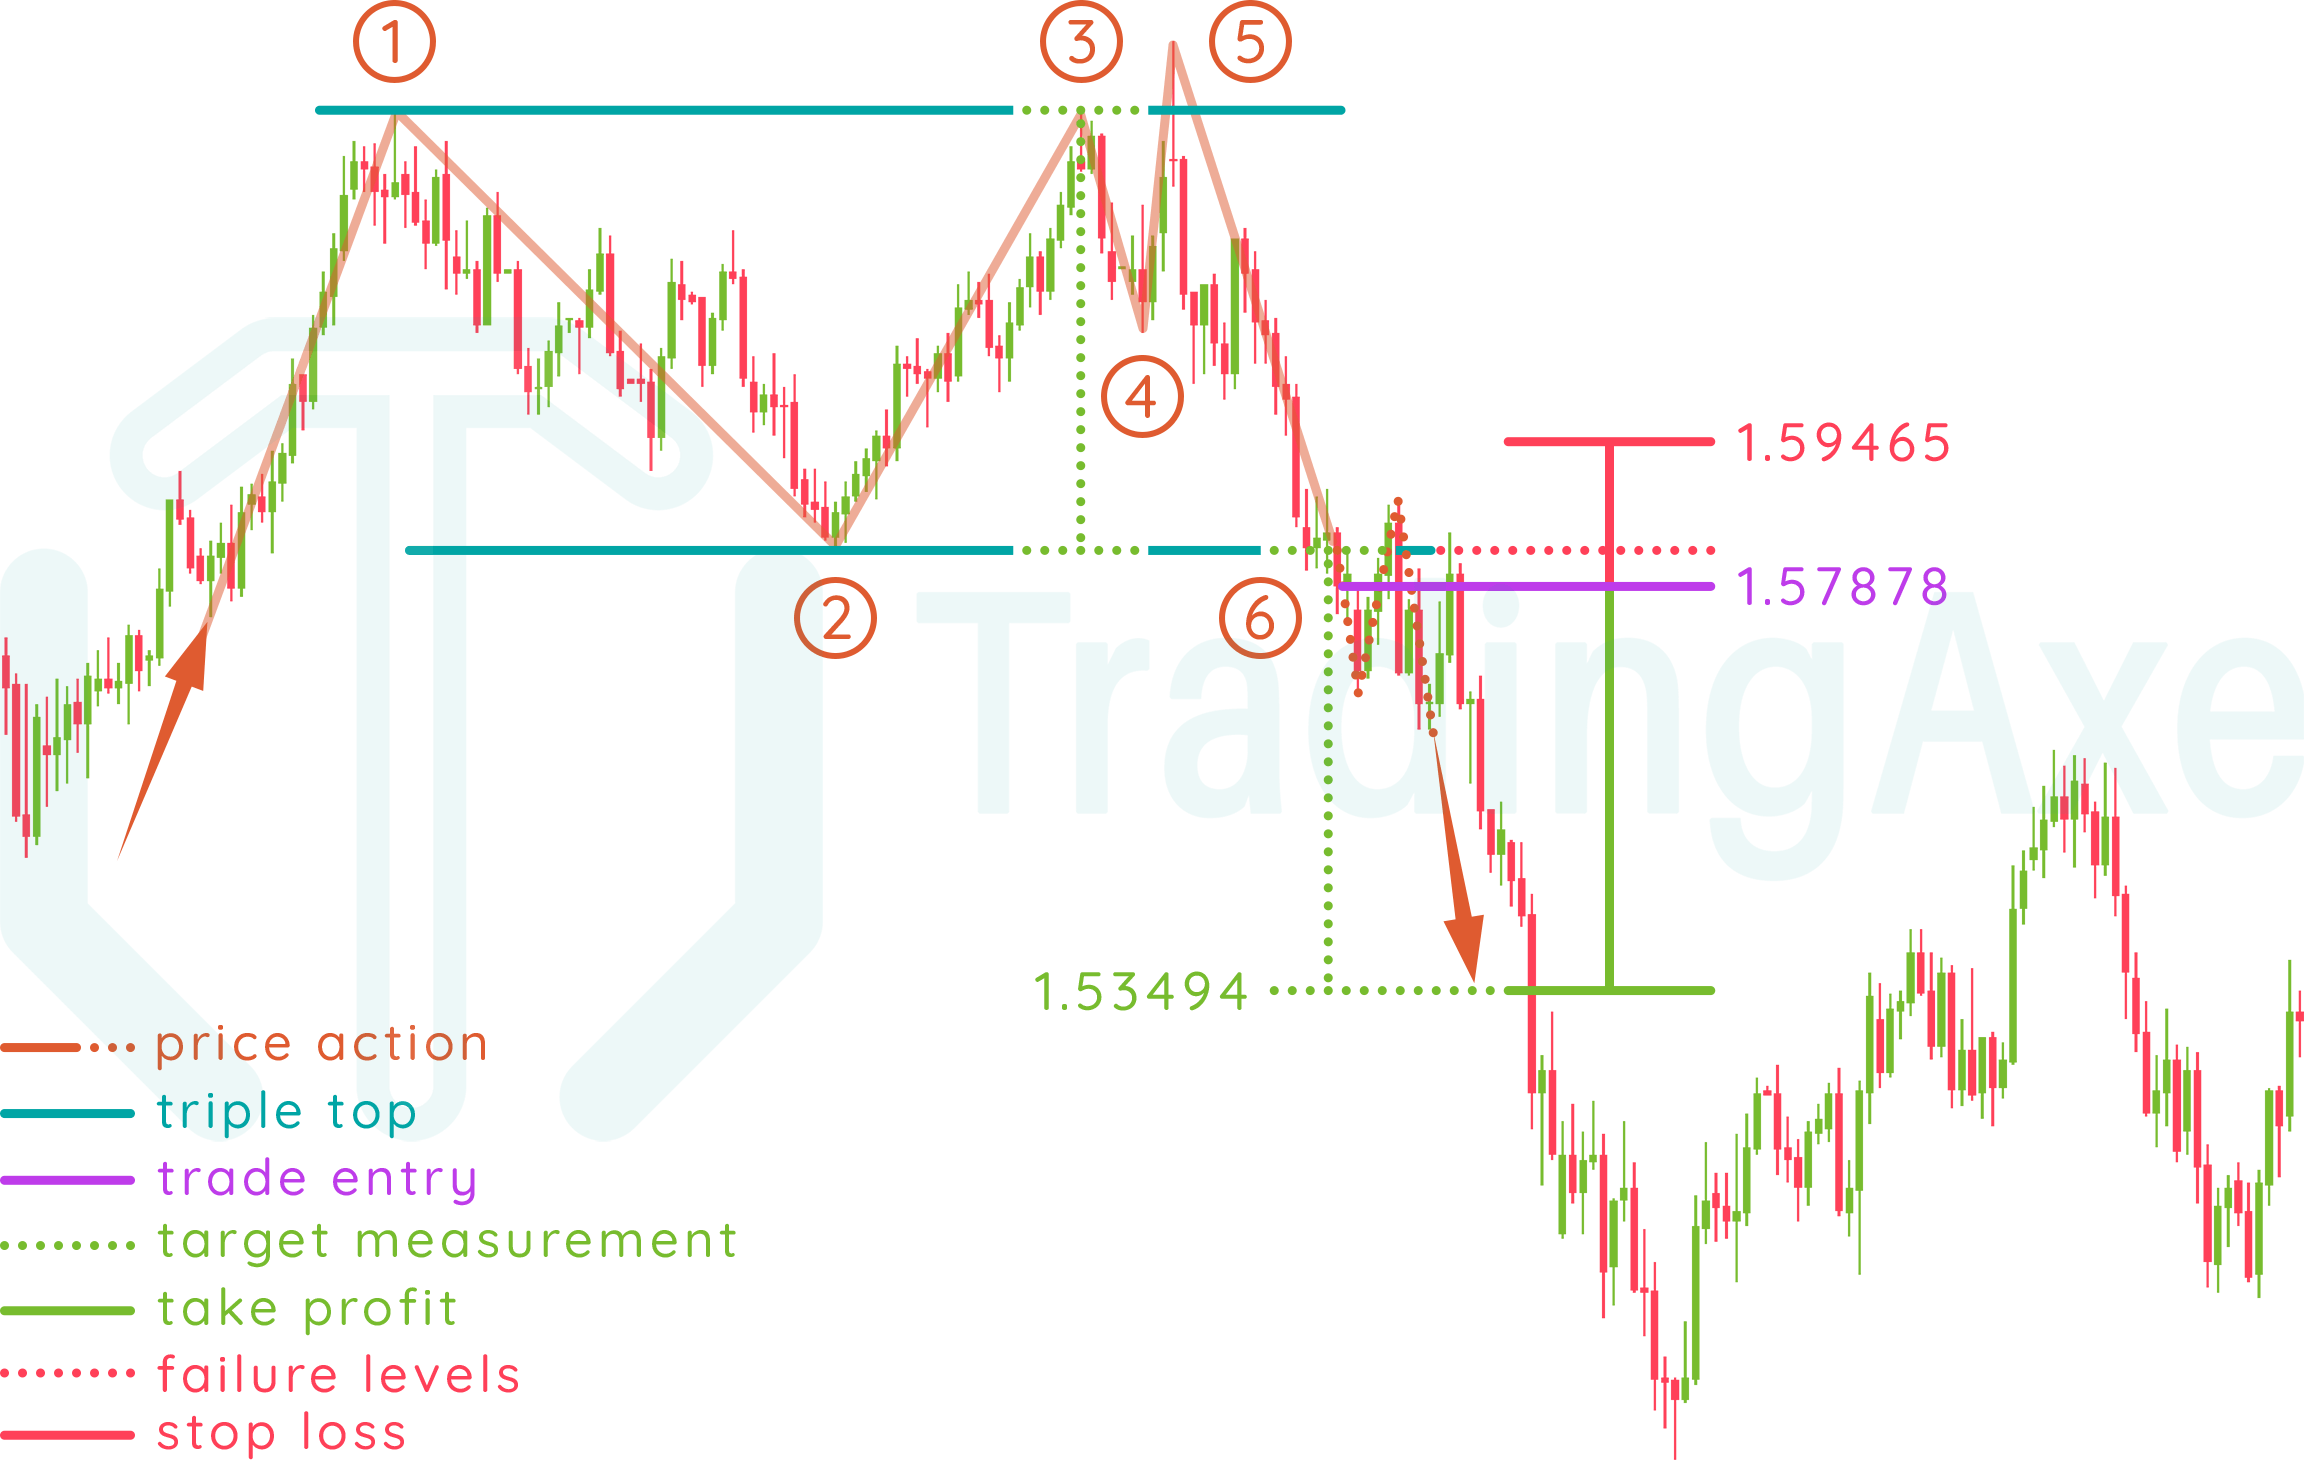 Triple top real trading example